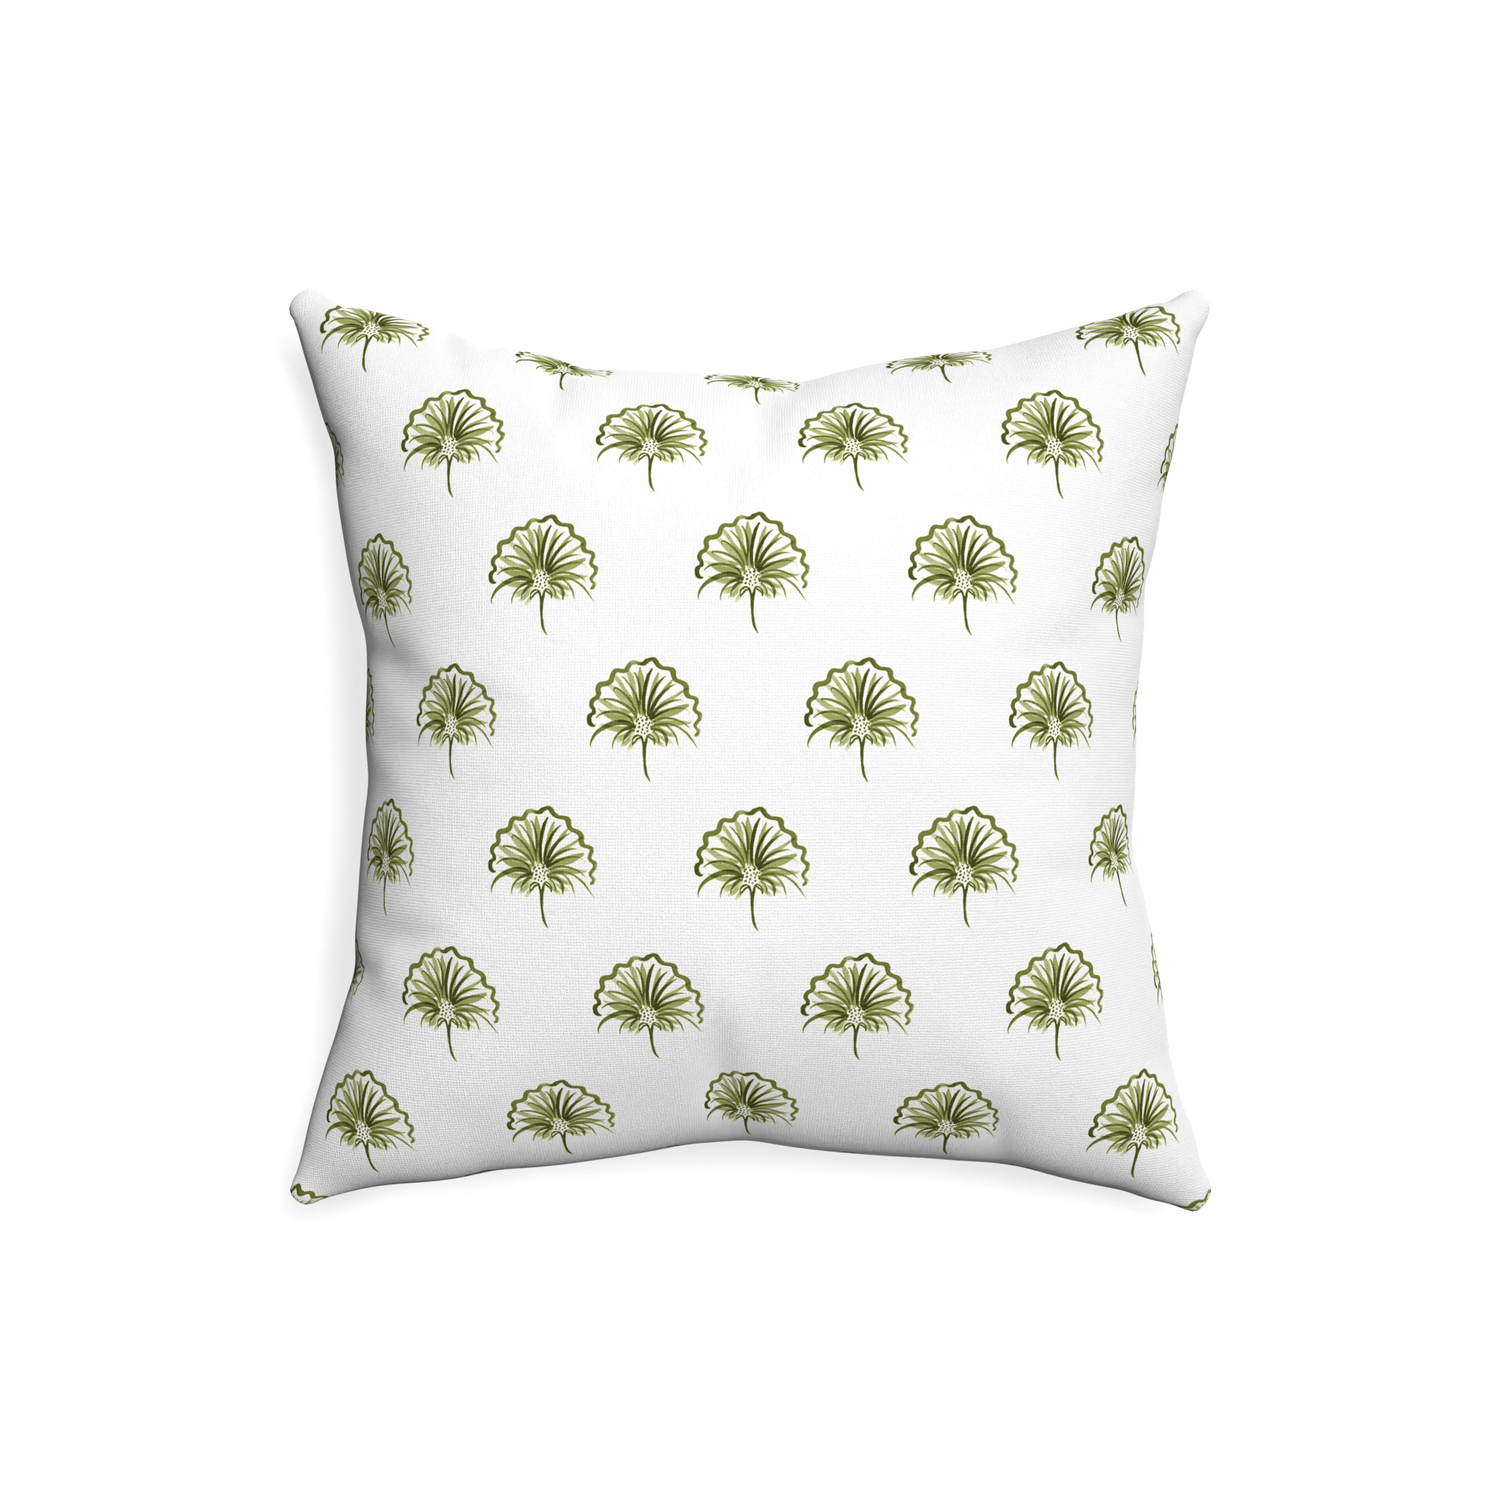 20-square penelope moss custom green floralpillow with none on white background